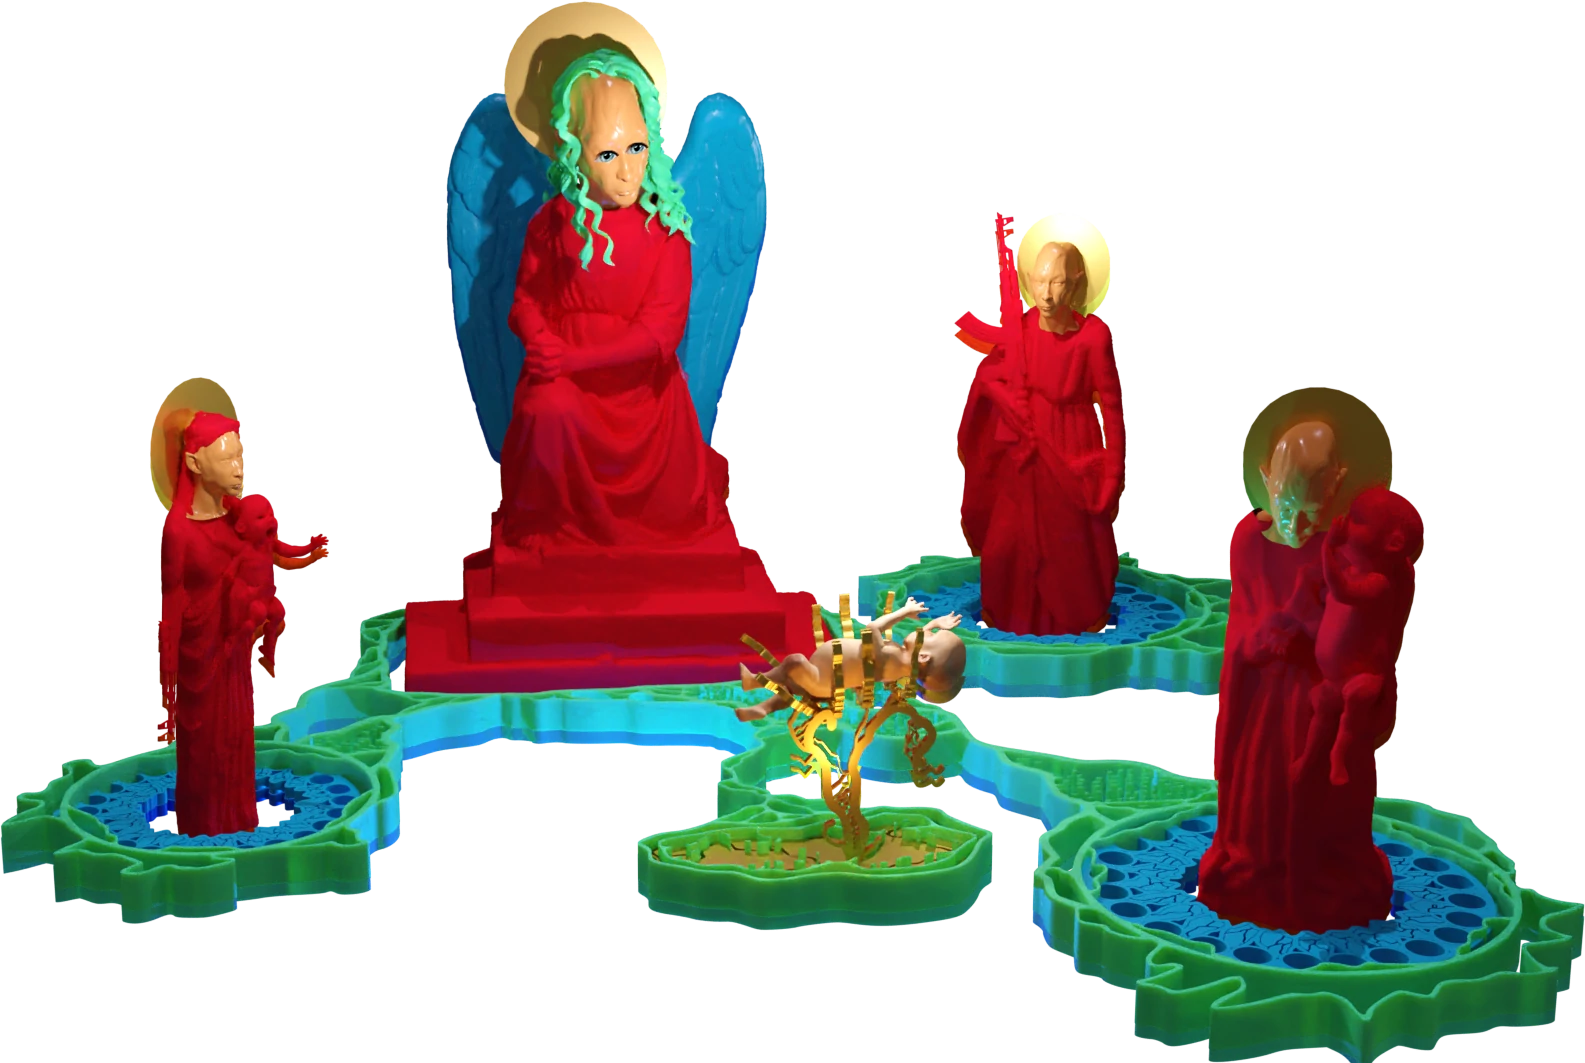 a nativity scene of figures in red robes and with golden disc halos. at the center is a baby in a golden branch like manger.